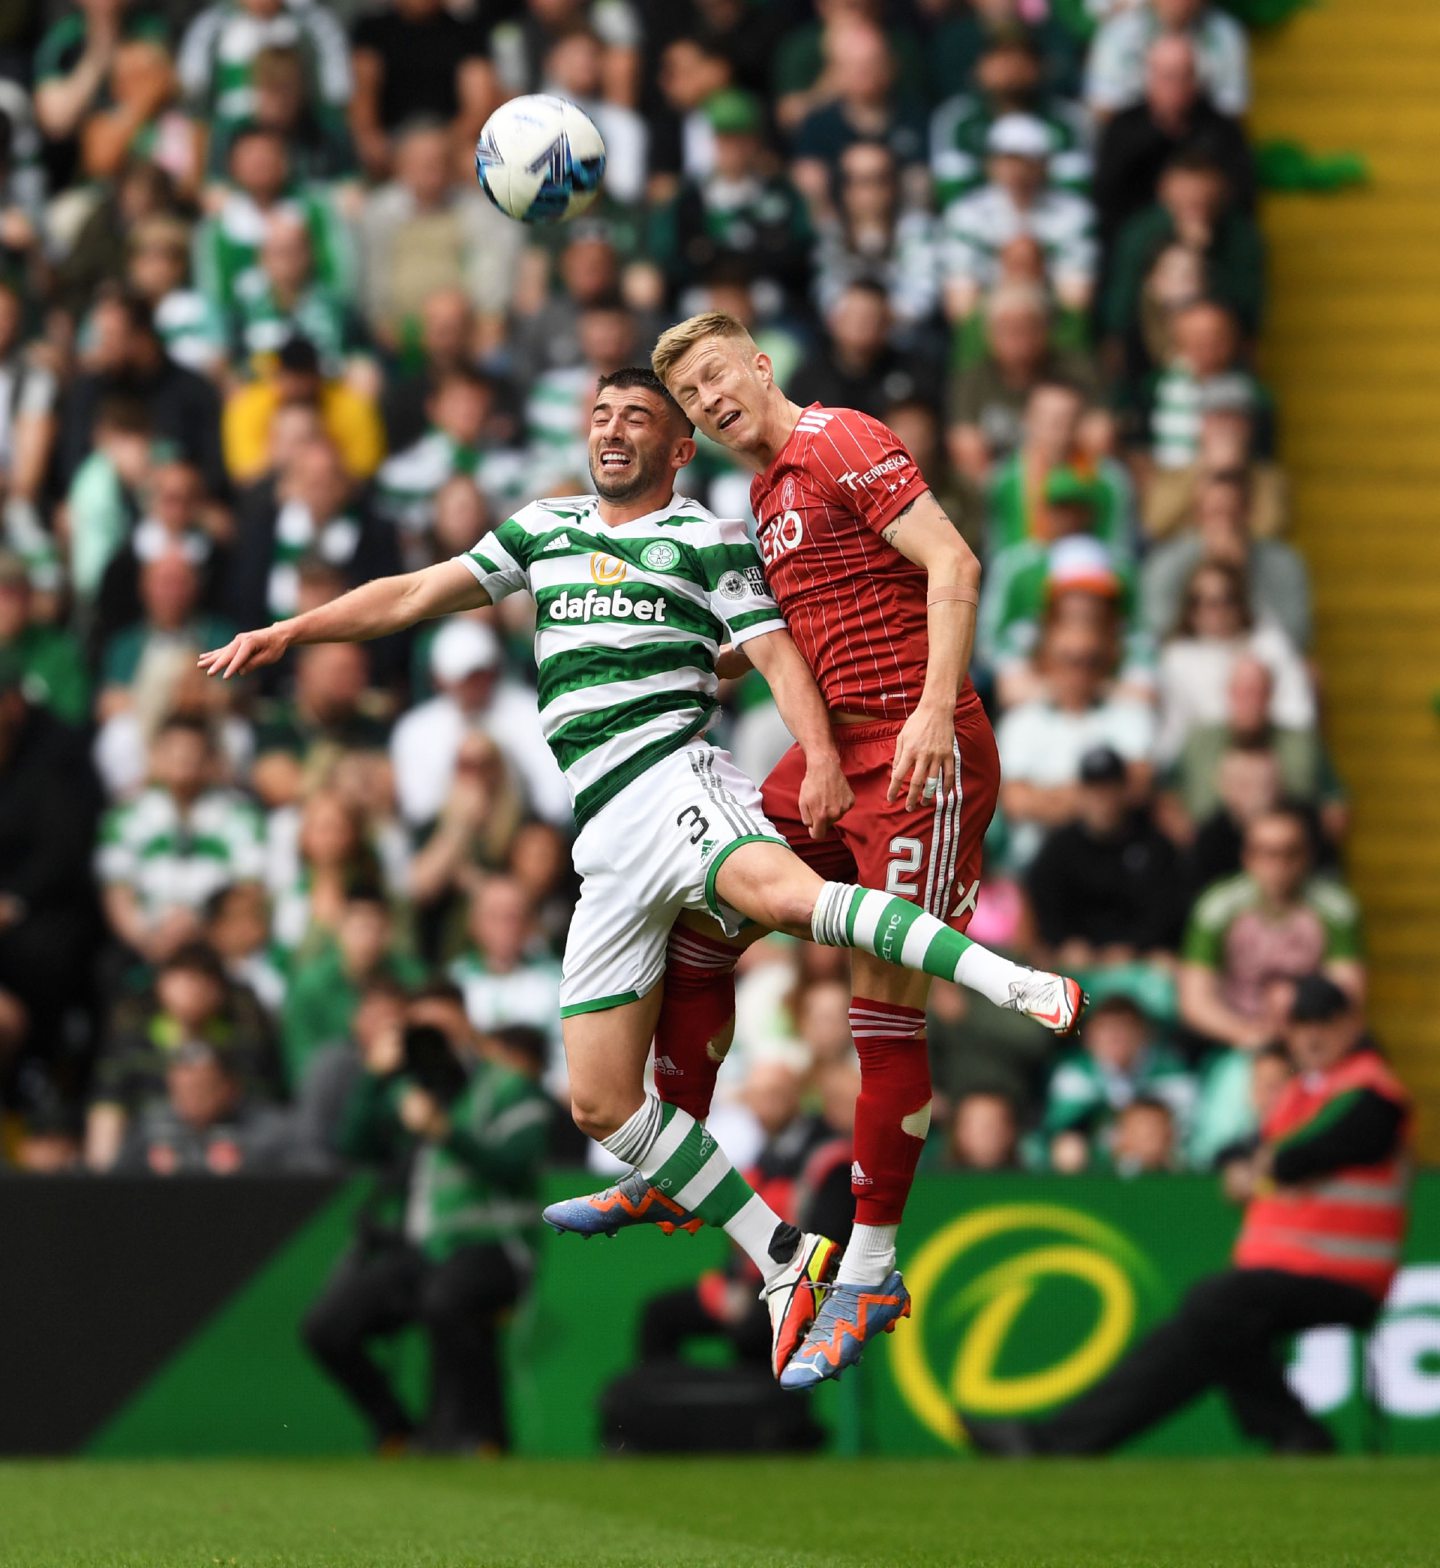 Greg Taylor and Ross McCrorie both aiming to header the ball during the Aberdeen v Celtic game